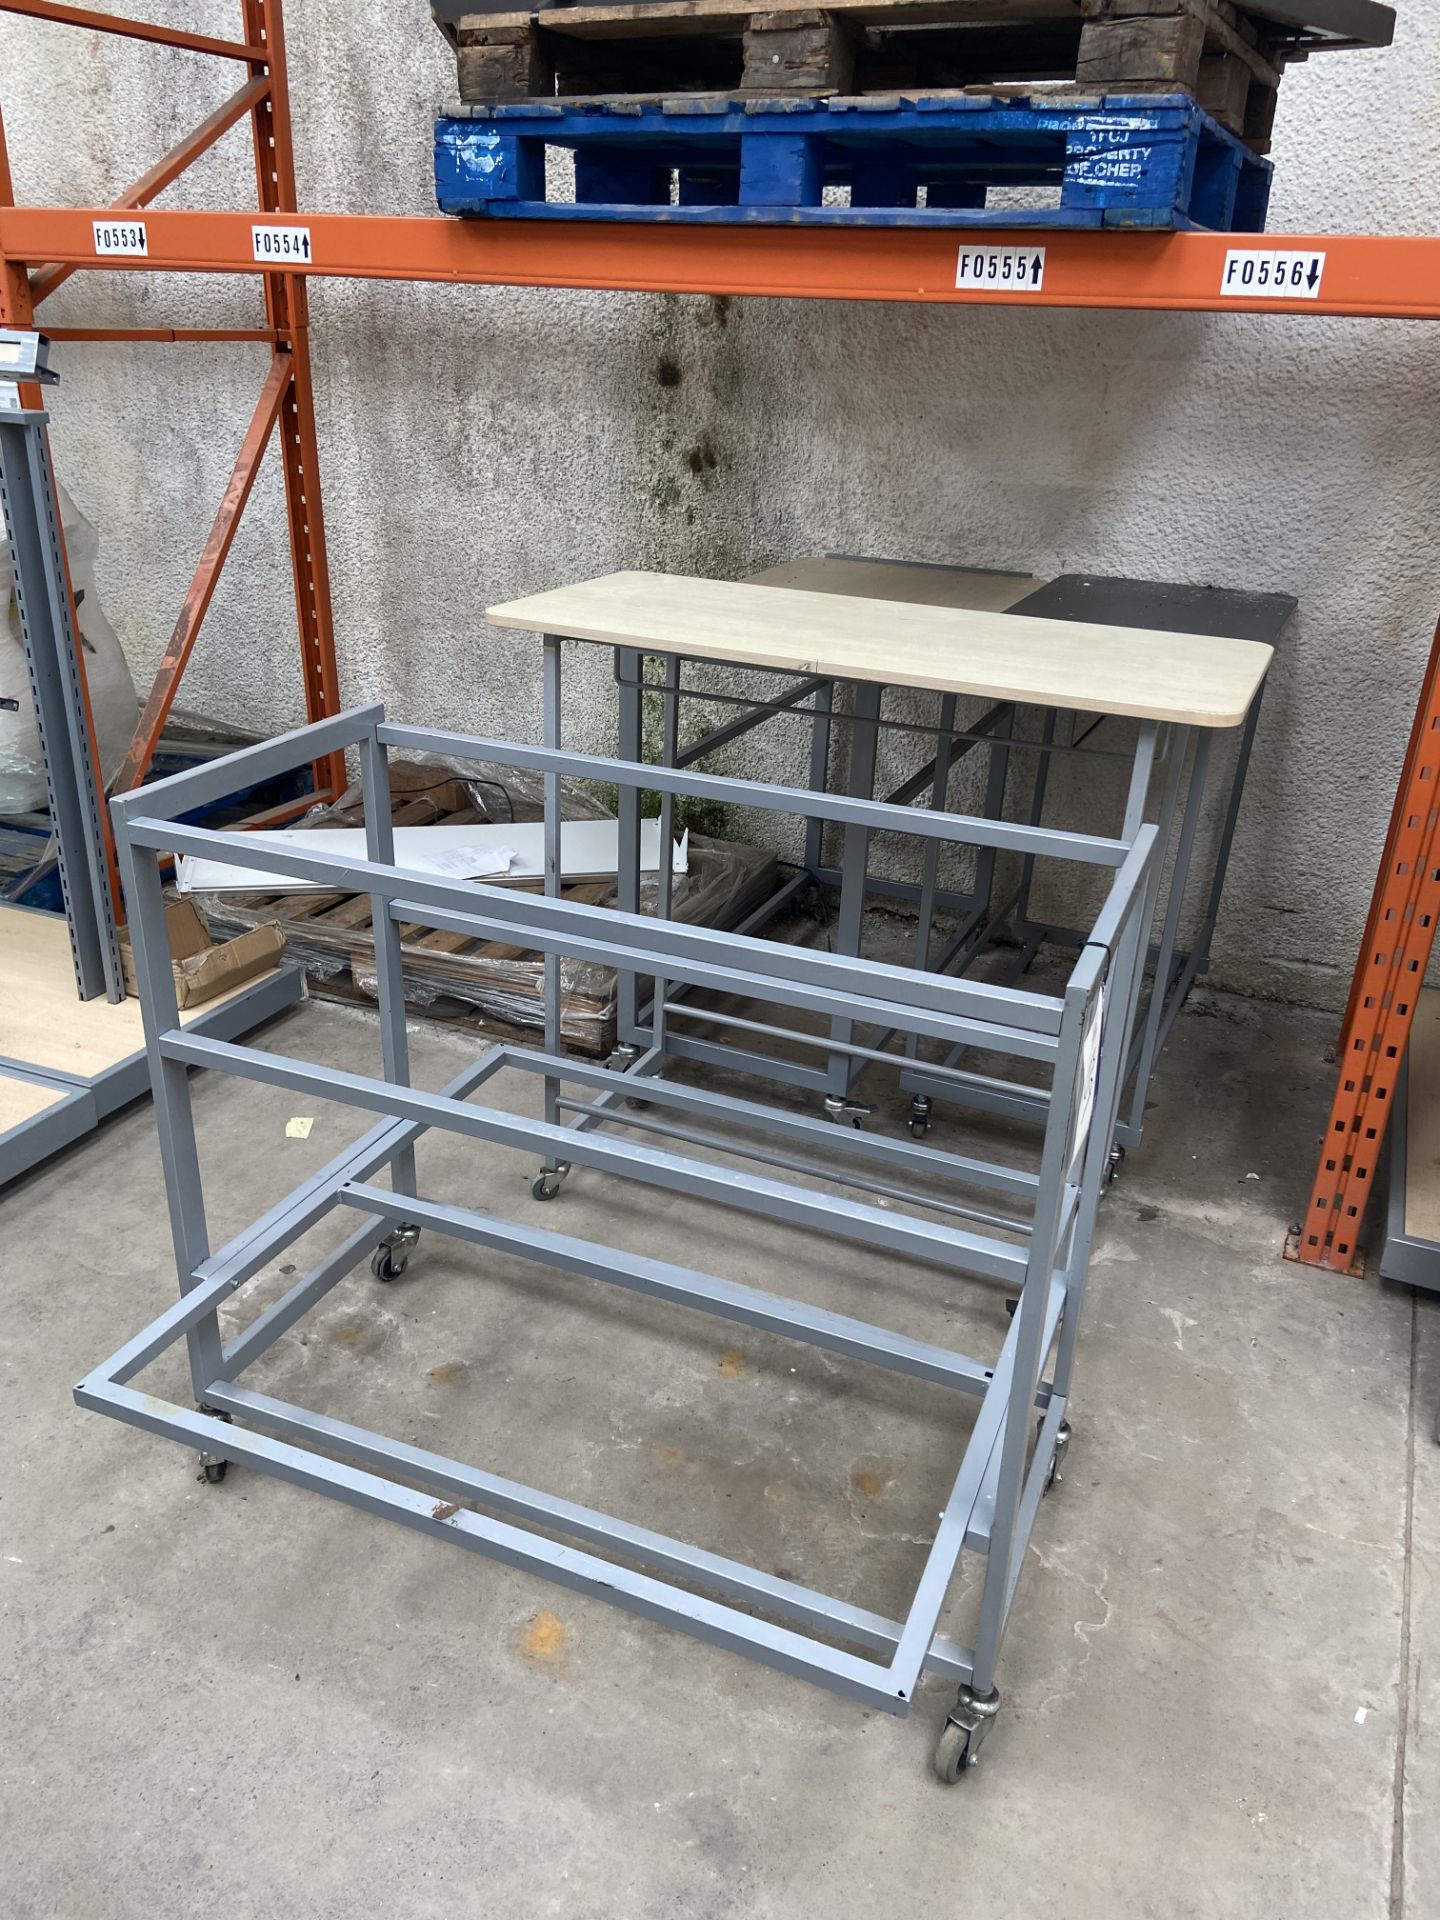 Four Assorted Display Stands, Lot located 33-37 Carron Place, East Kilbride, North Lanarkshire,